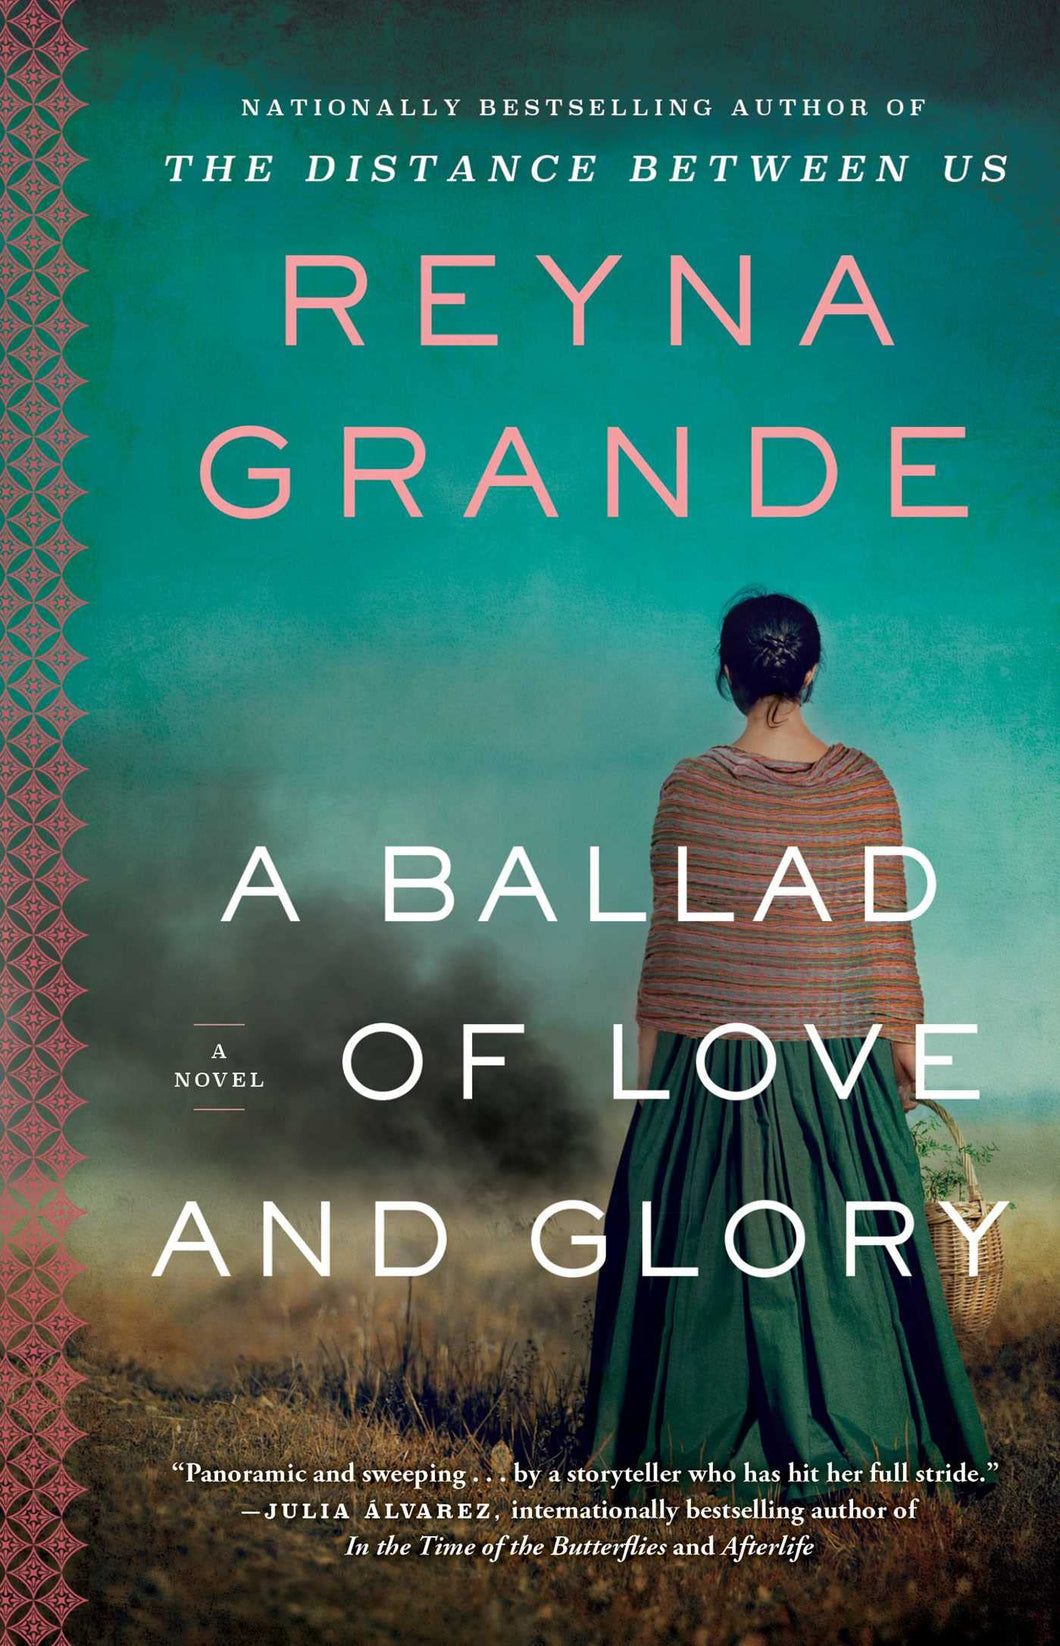 A Ballad of Love and Glory by Reyna Grande